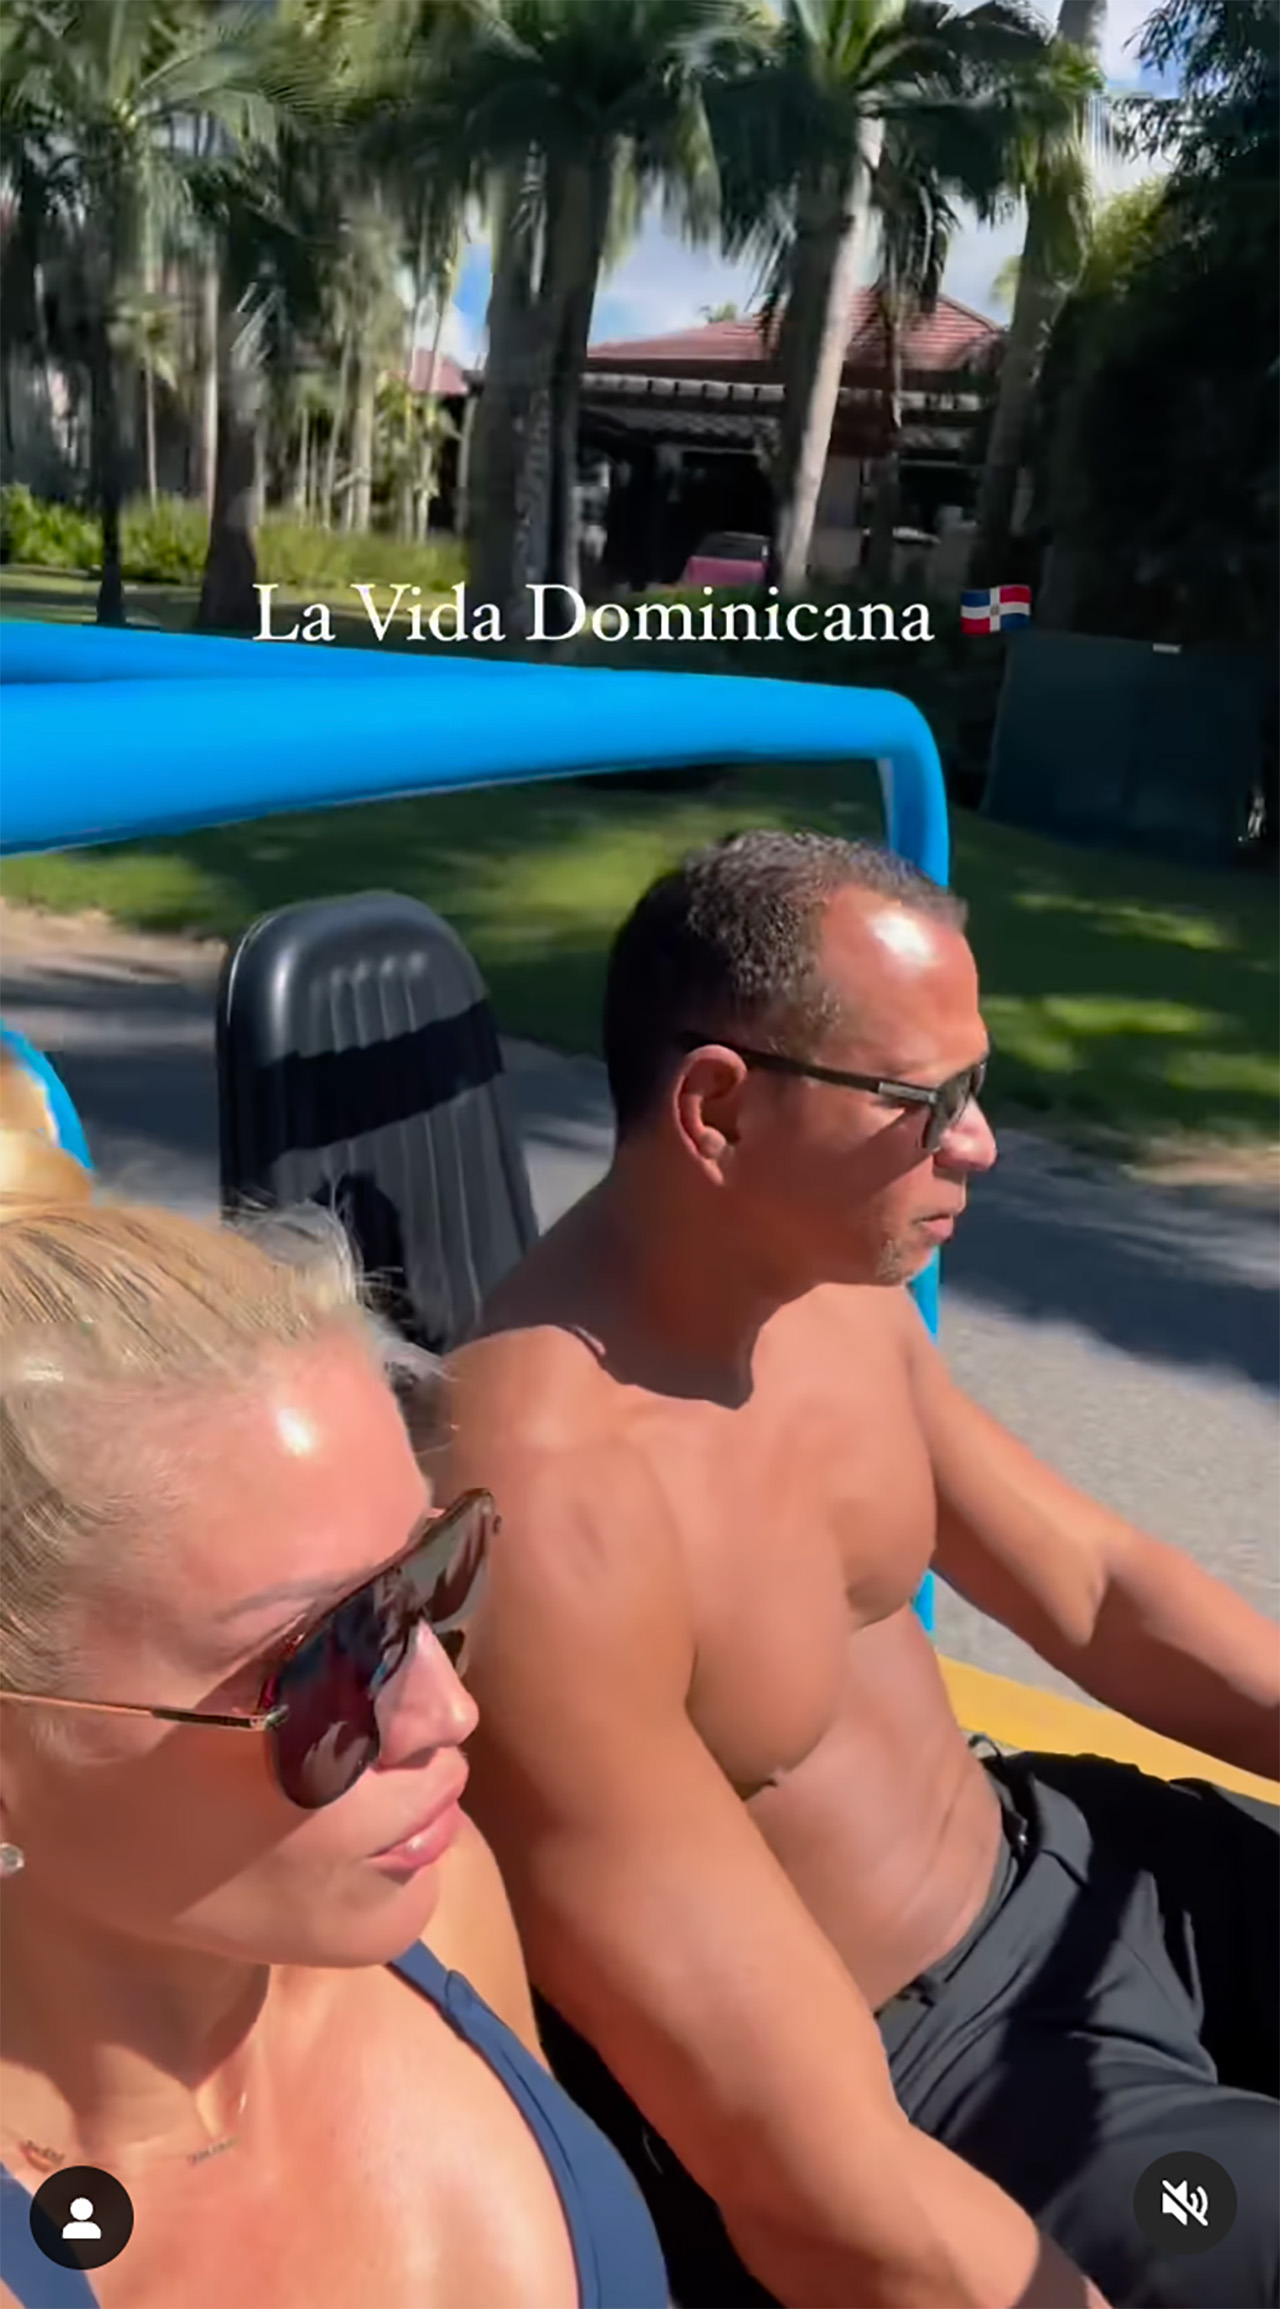 A-Rod shares a video from his trip to the Dominican Republic.